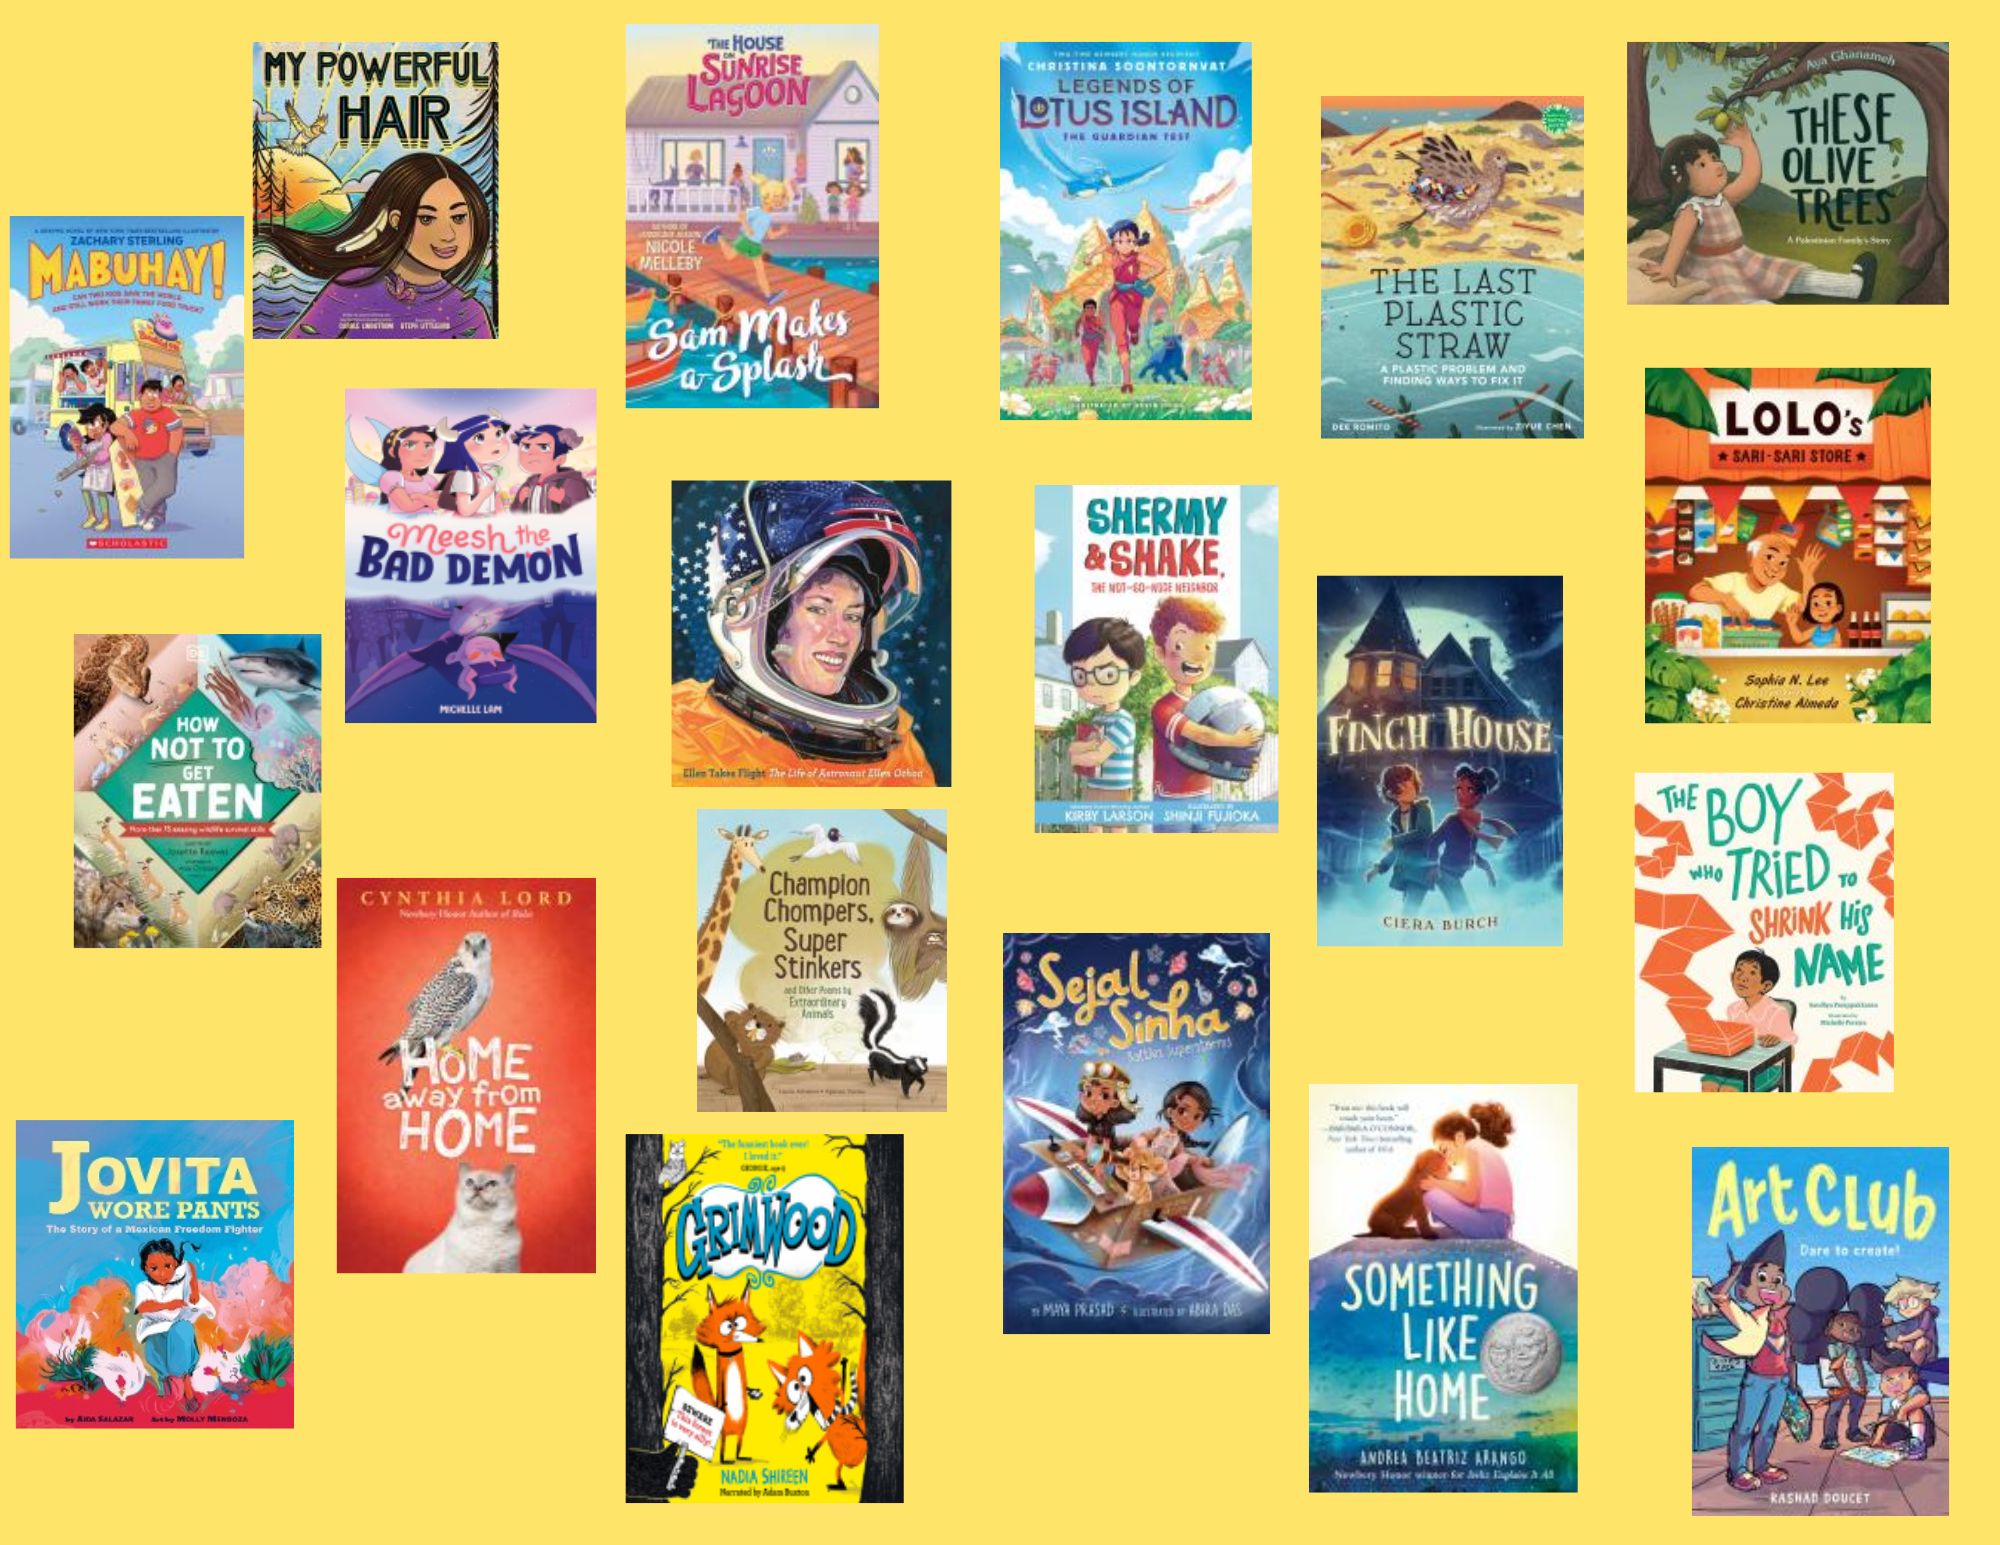 Photo collage of the fifteen books covers of the Rhode Island Children's Book Award Nominees on a yellow background. Each book cover includes title of book, author and illustrator. 